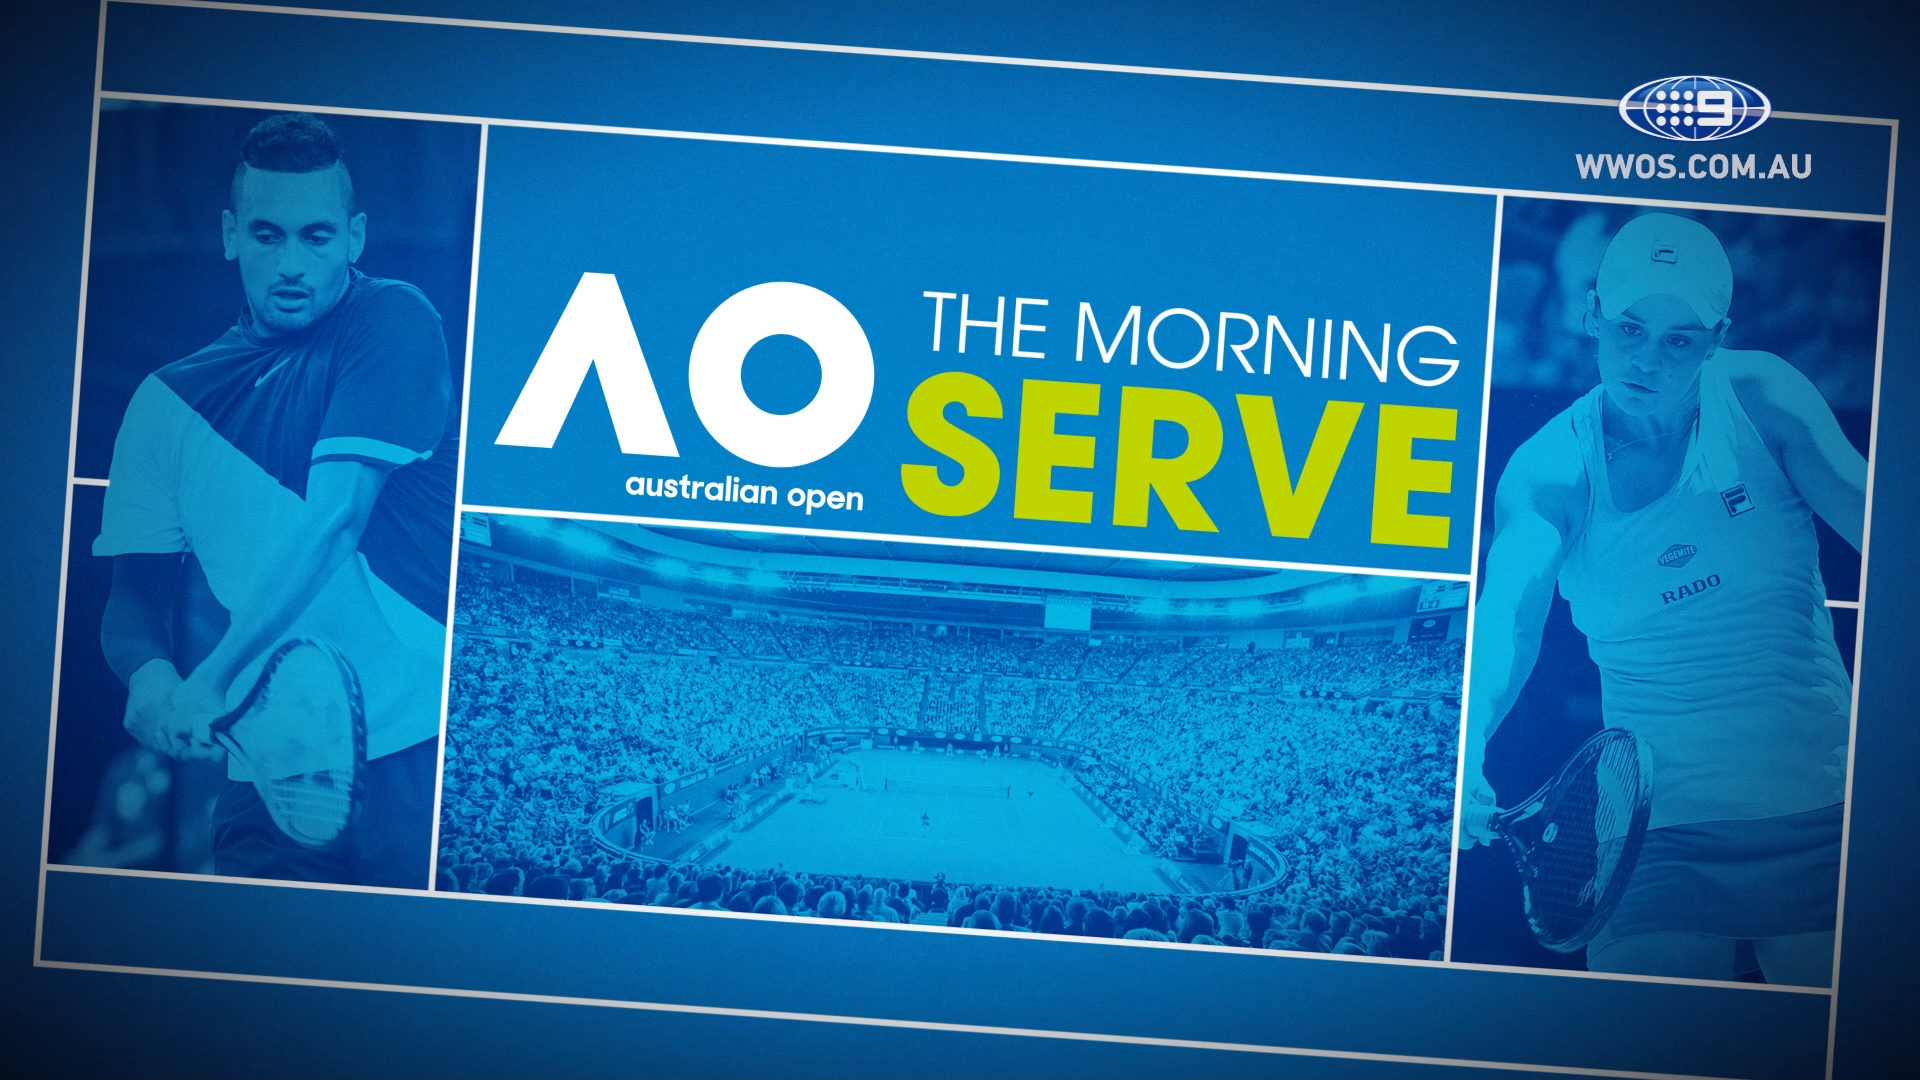 Can Ash deliver the Open goods? - The Morning Serve